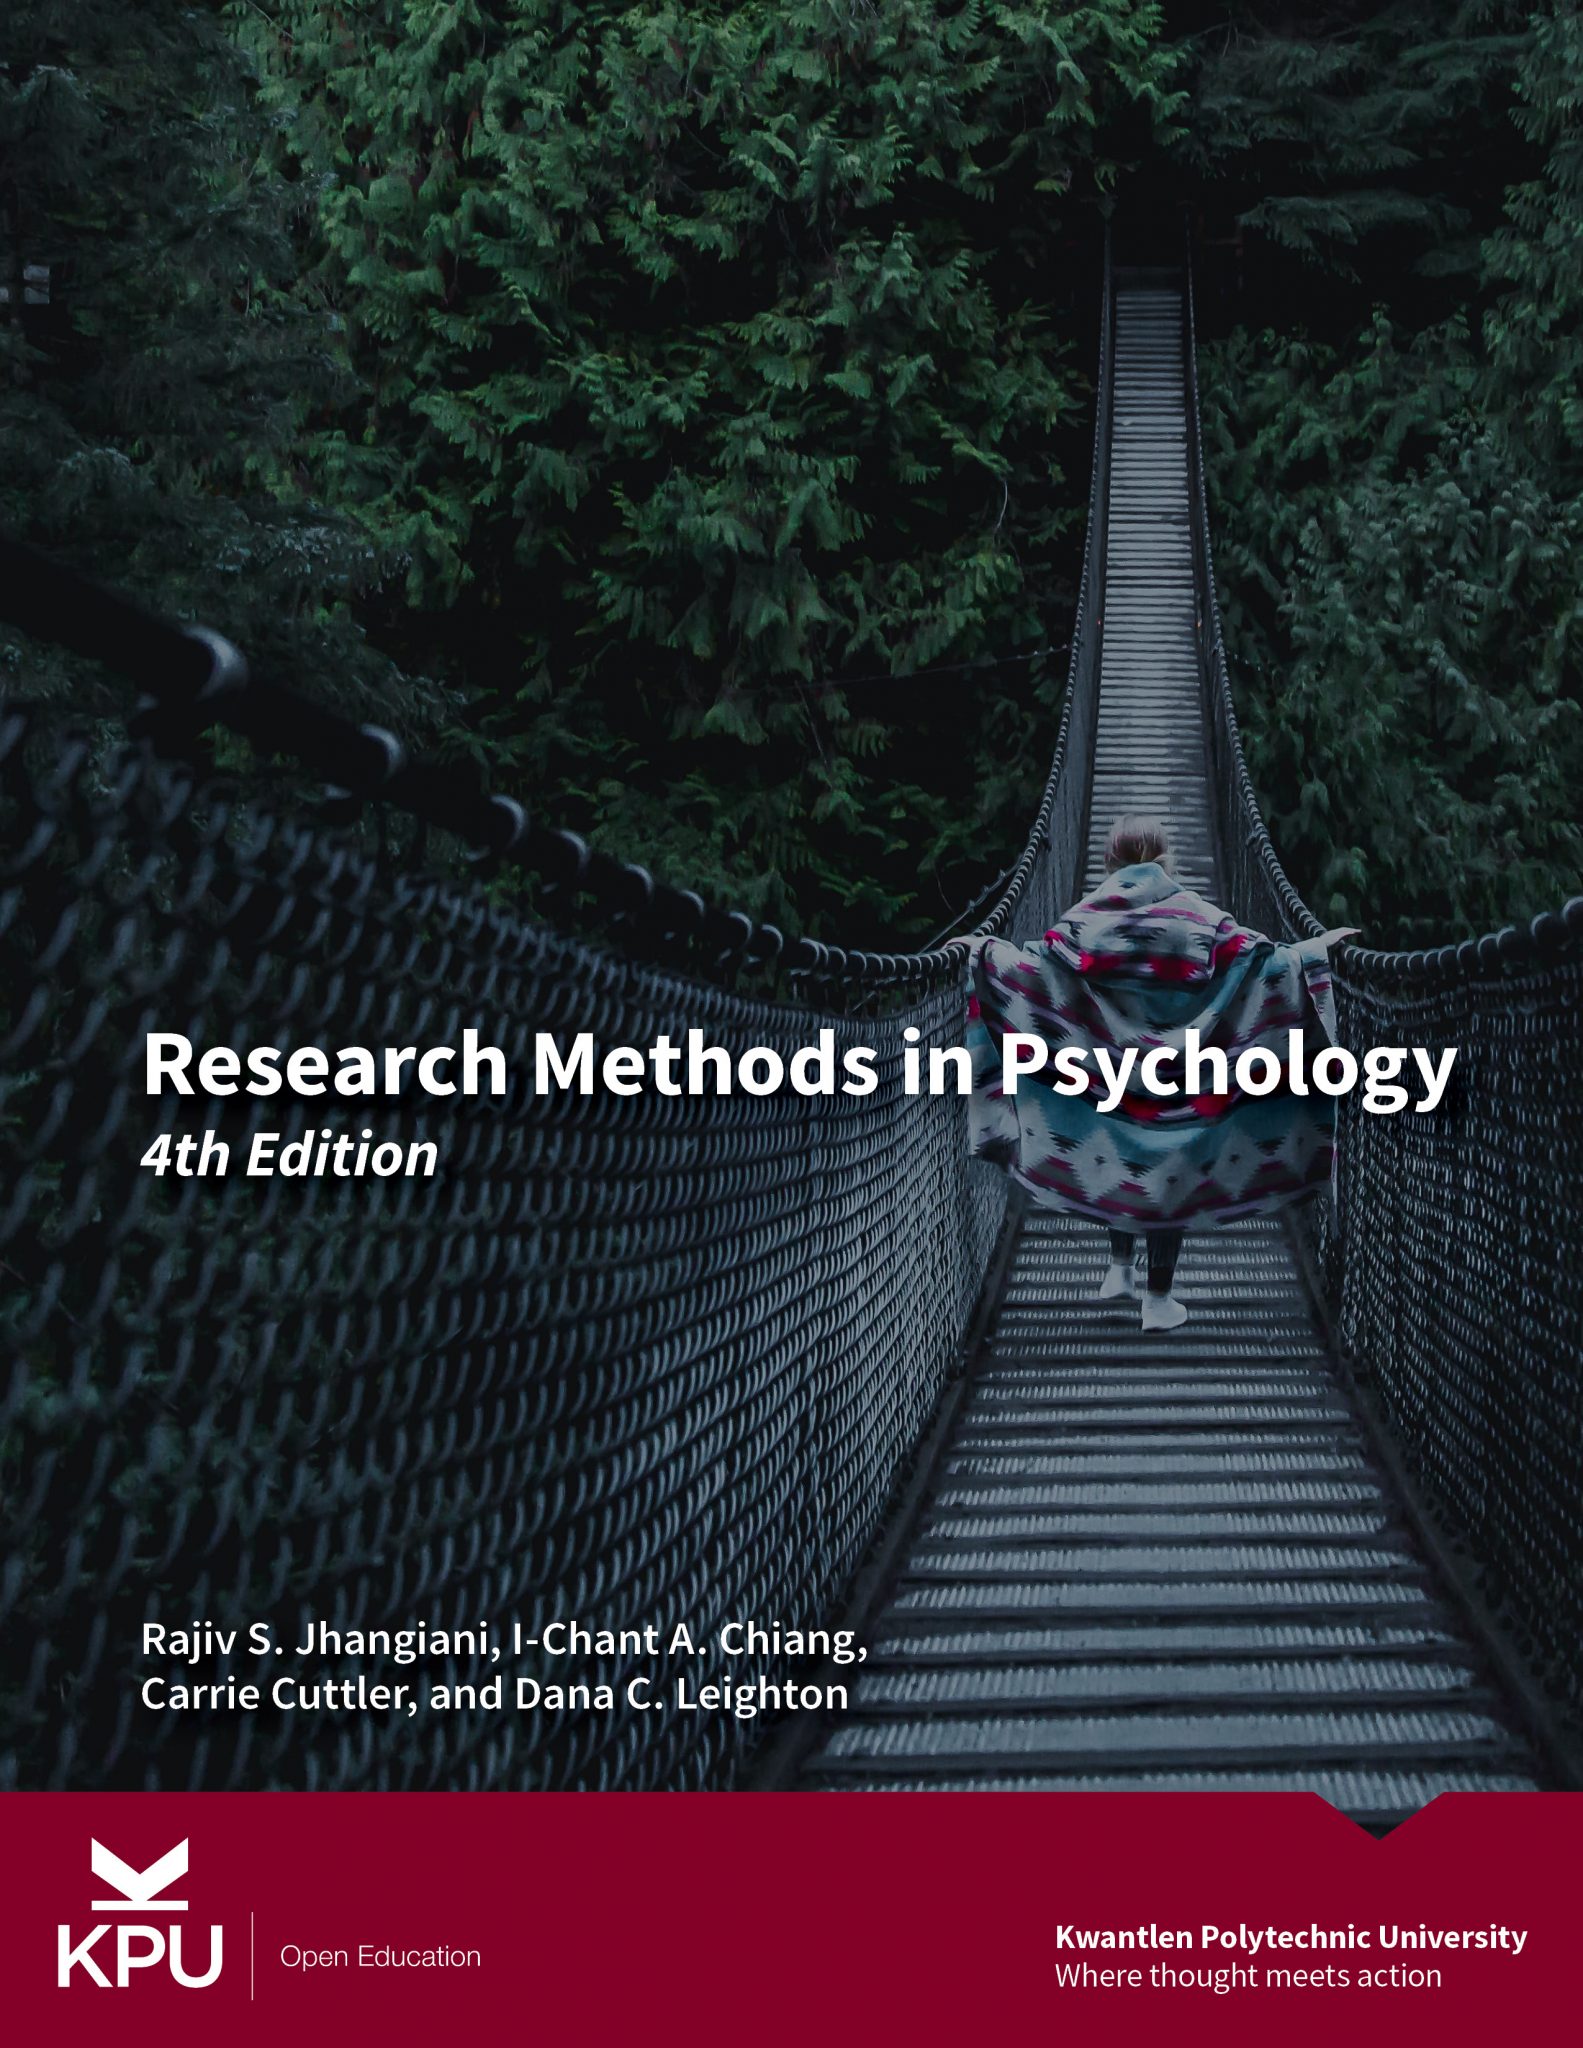 research methods in psychology gary w. heiman